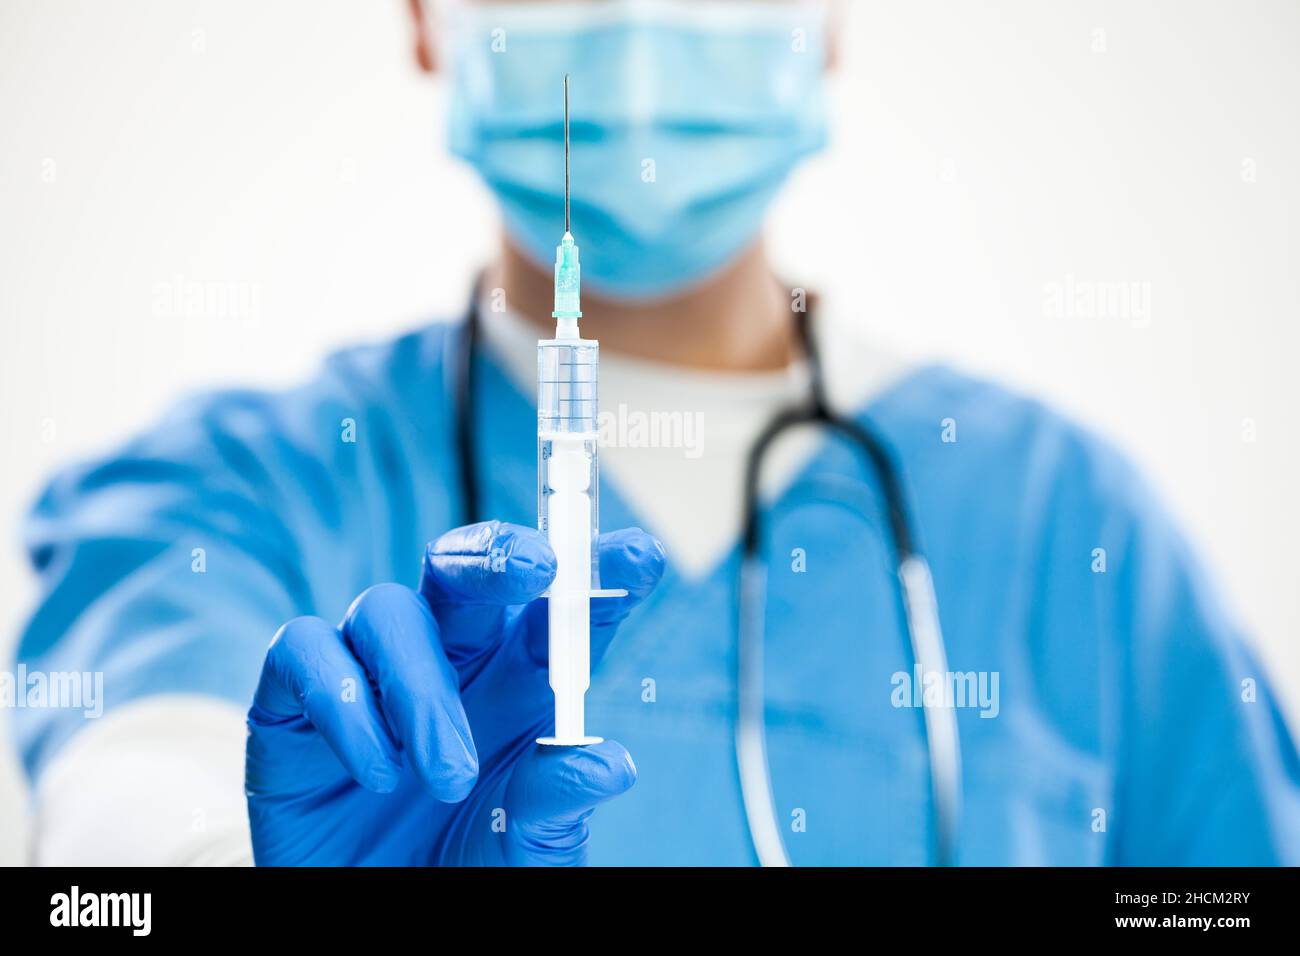 Closeup of syringe in needle with vaccination dose,medical worker wearing blue protective surgical face mask,latex gloves scrubs,vaccination Stock Photo